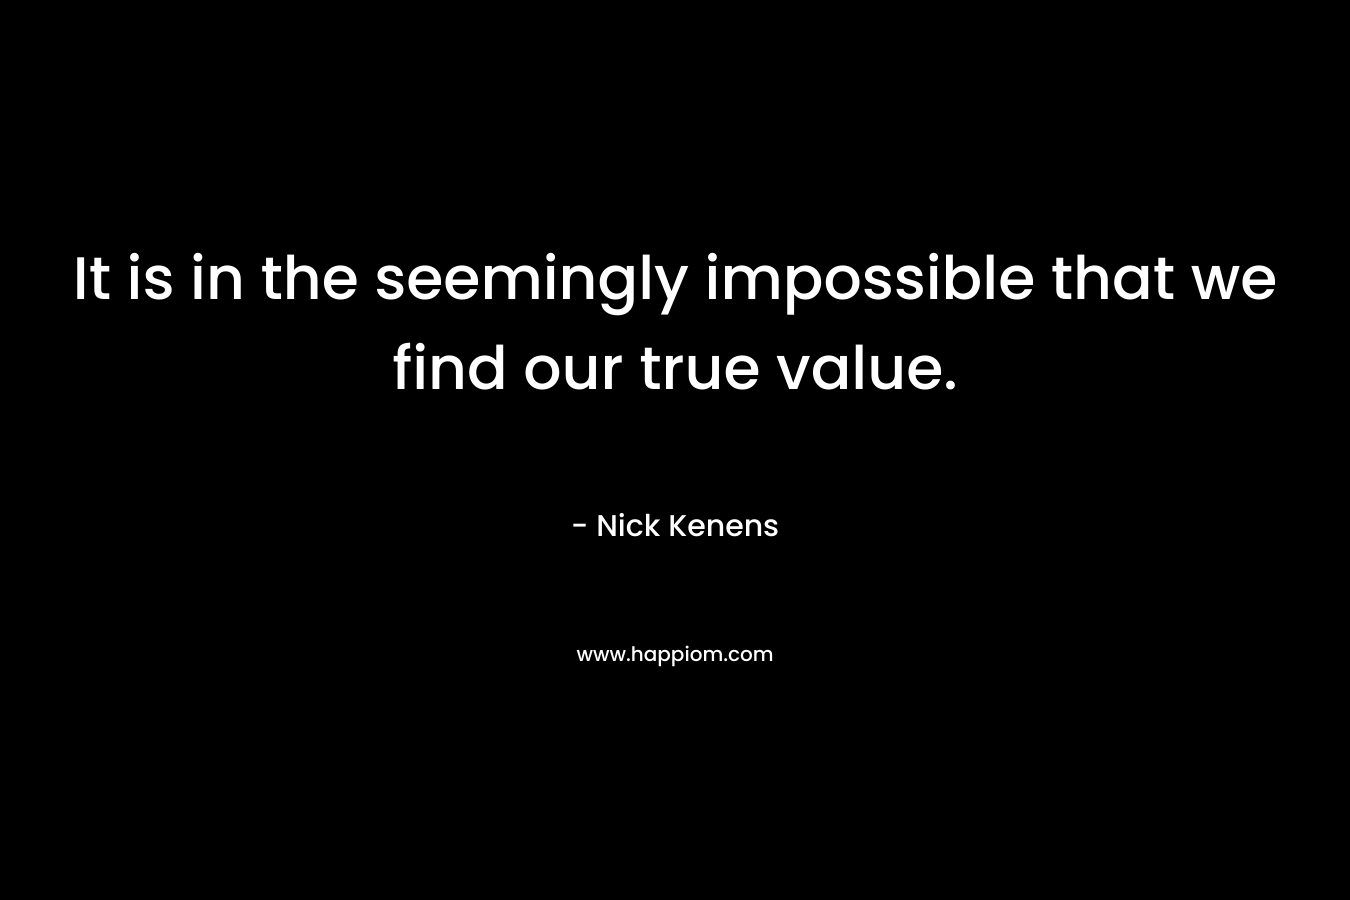 It is in the seemingly impossible that we find our true value.